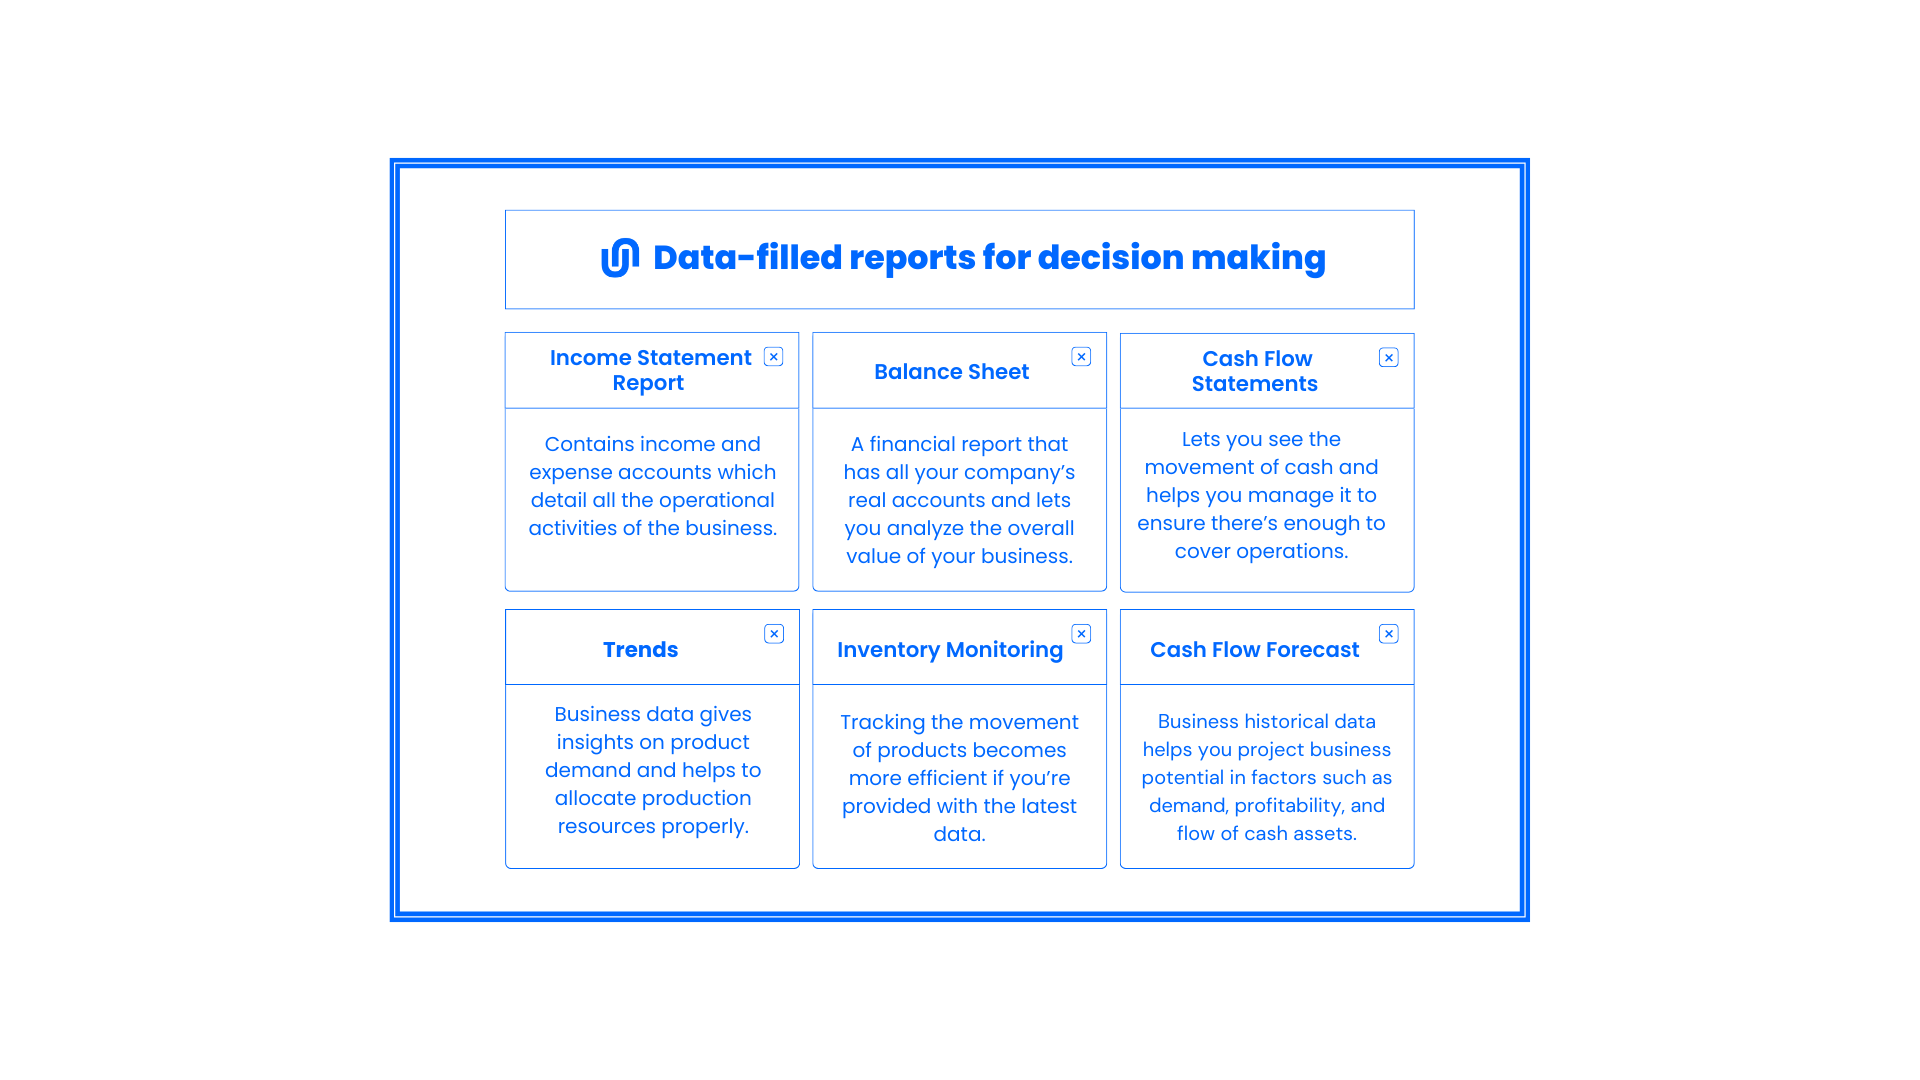 An infographic about data-filled reports for decision making: Income statement report, Balance sheet, Cash flow statements, Trends, Inventory monitoring, Cash flow forecast.